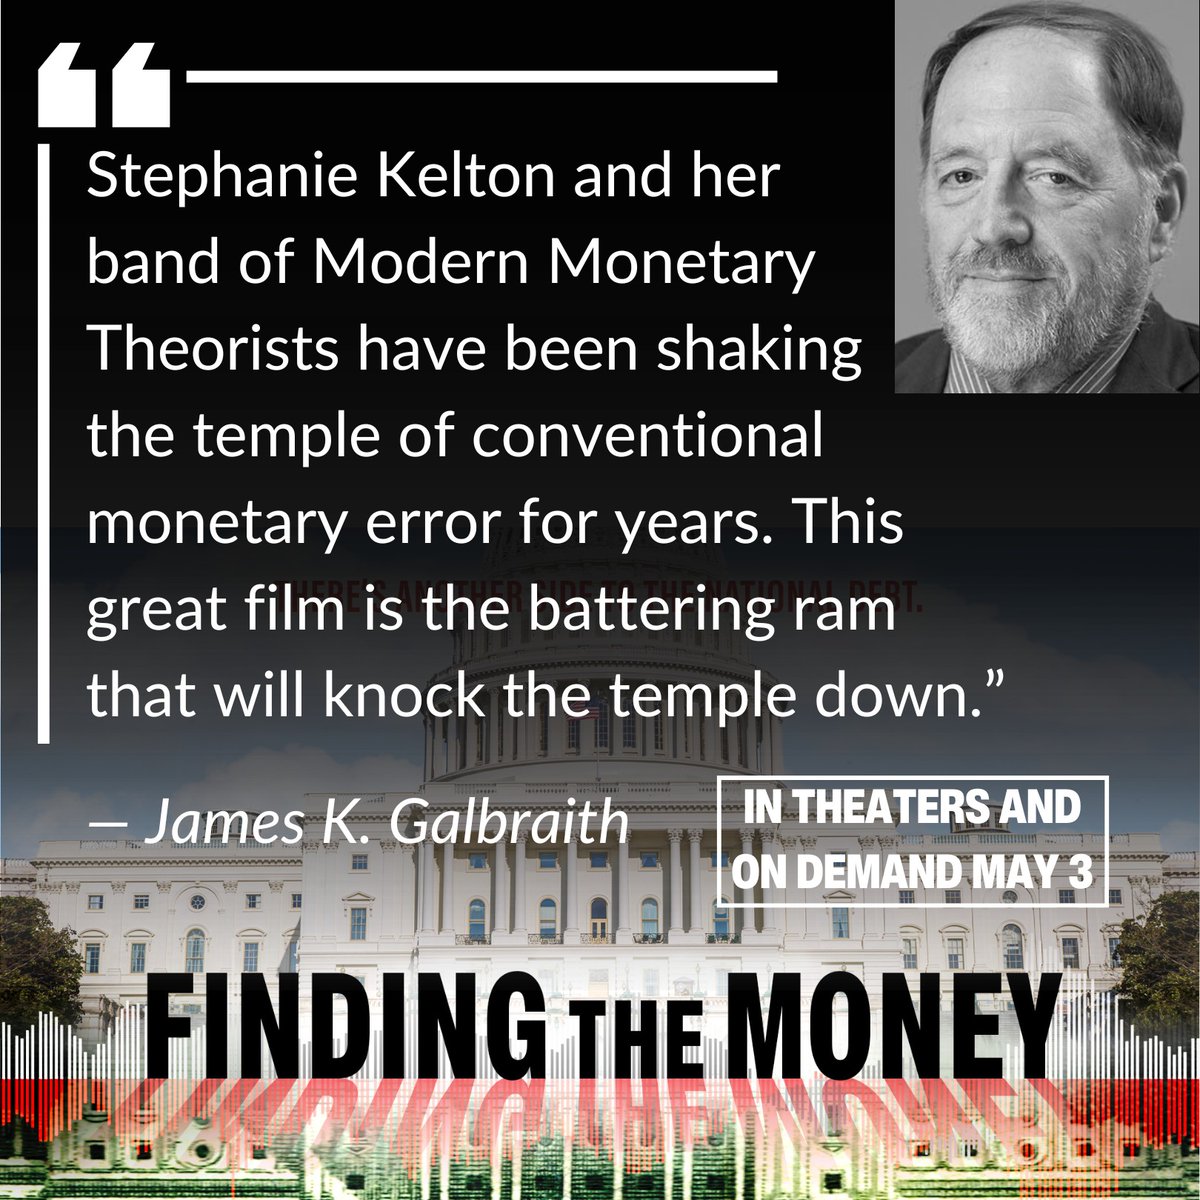 Thanks to Professor James K. Galbraith for watching FINDING THE MONEY! “A battering ram...” featuring @StephanieKelton and an intrepid group of economists on a mission to rethink economics. WATCH in Theaters and On Demand Friday May 3. FindingMoneyFilm.com